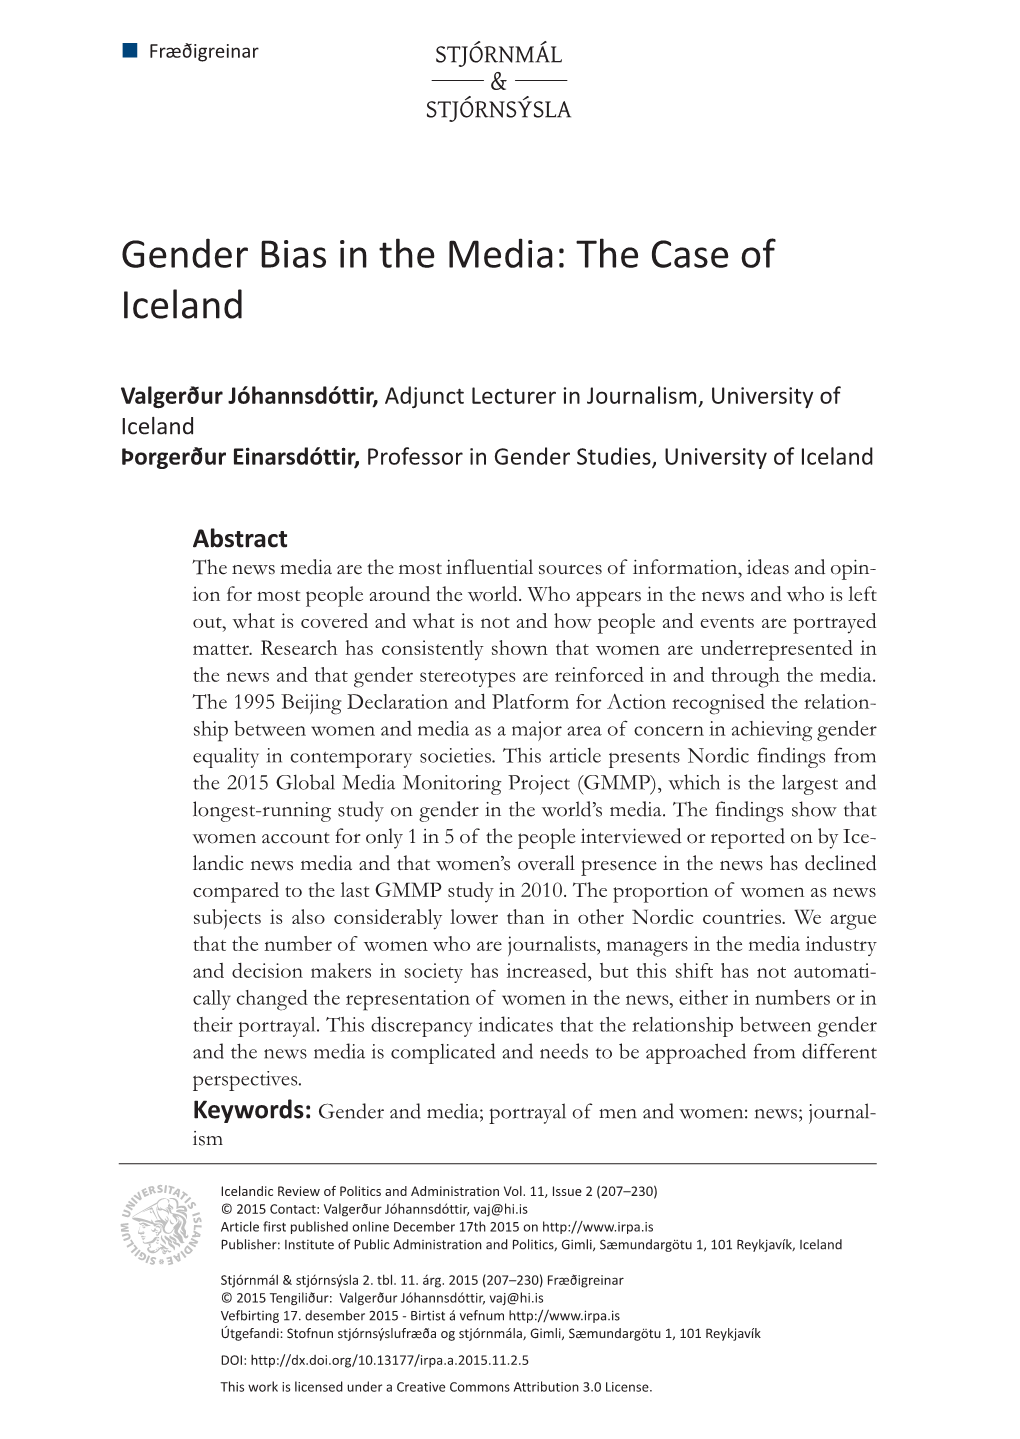 Gender Bias in the Media: the Case of Iceland